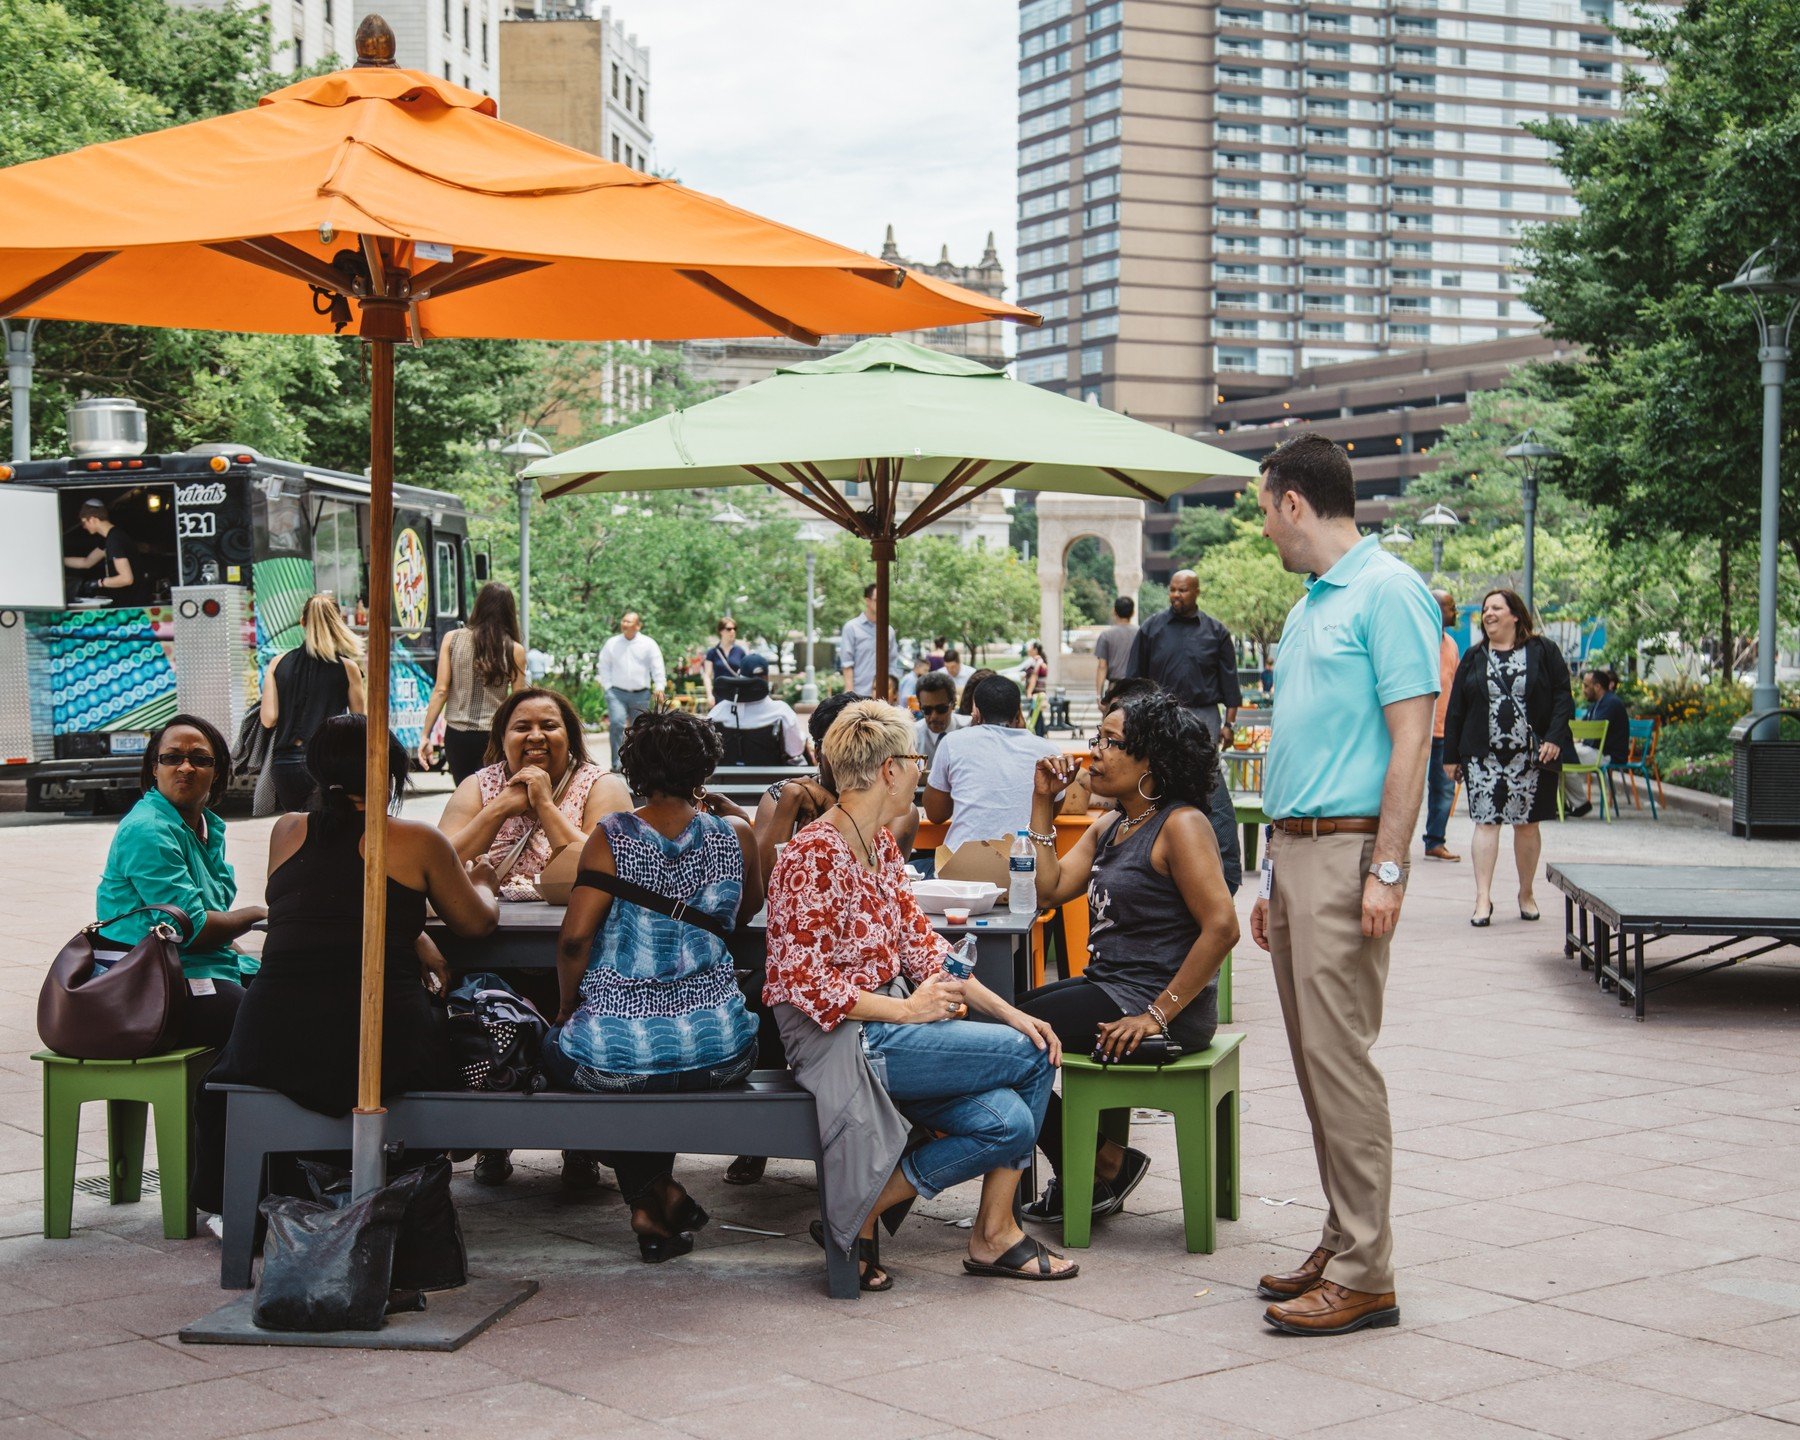 It&rsquo;s food truck szn, Detroit! 🚛🍔 Fuel up with tasty bites from food trucks parked in Cadillac Square!

#DowntownDetroit #FoodTrucks